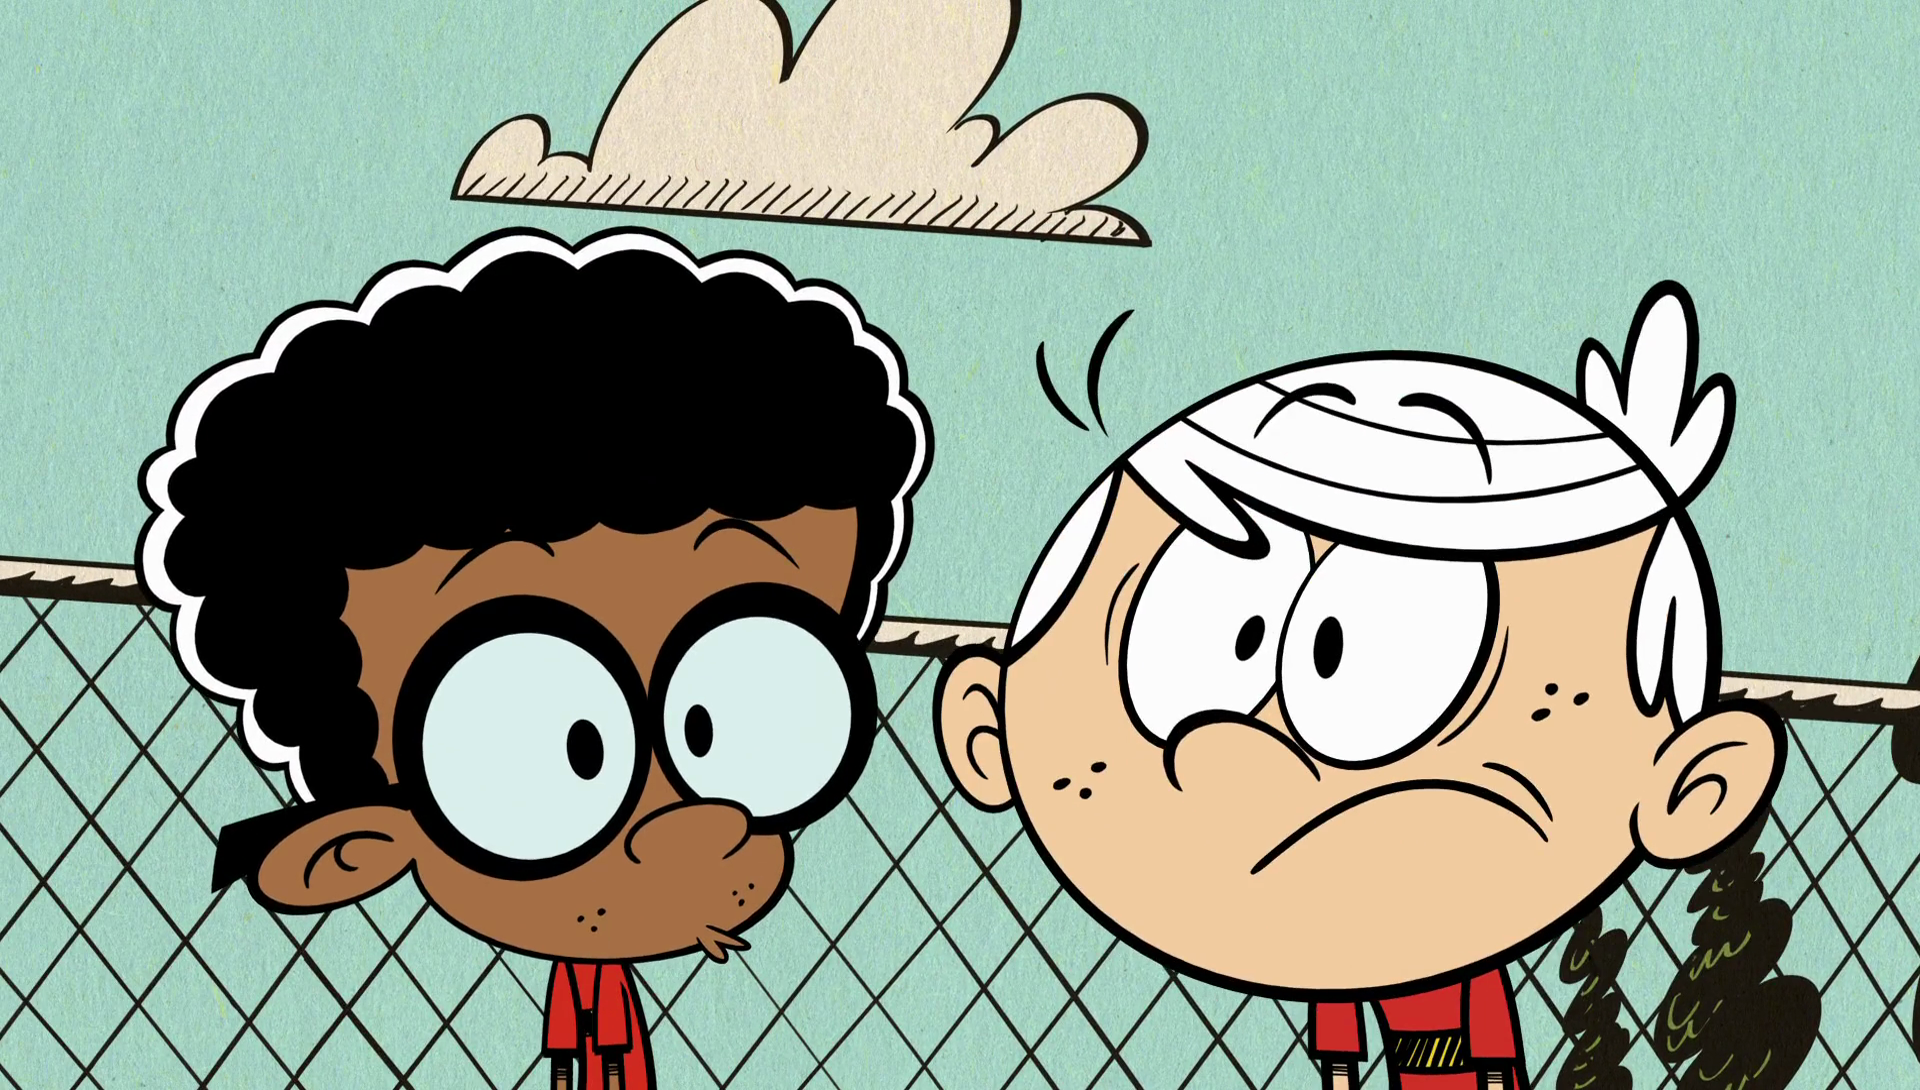 Image - S1E26A Lincoln and Clyde stop suddenly.png | The Loud HouseEncyclopedia | FANDOM powered by Wikia, Suddenly PNG - Free PNG